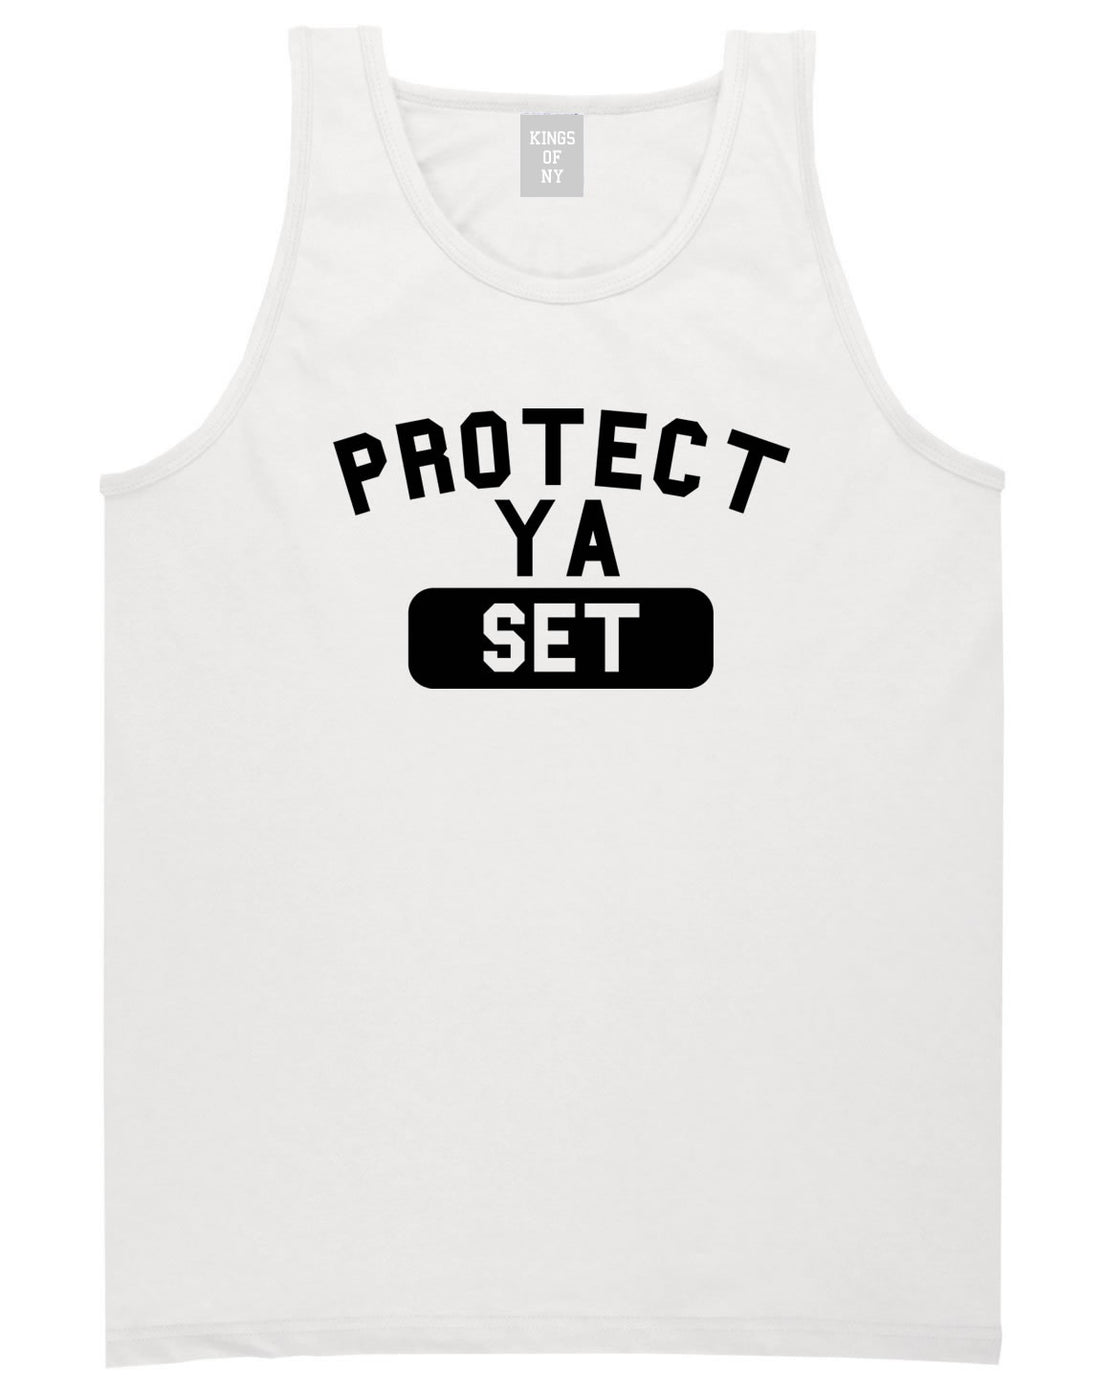 Protect Ya Set Neck Tank Top in White By Kings Of NY